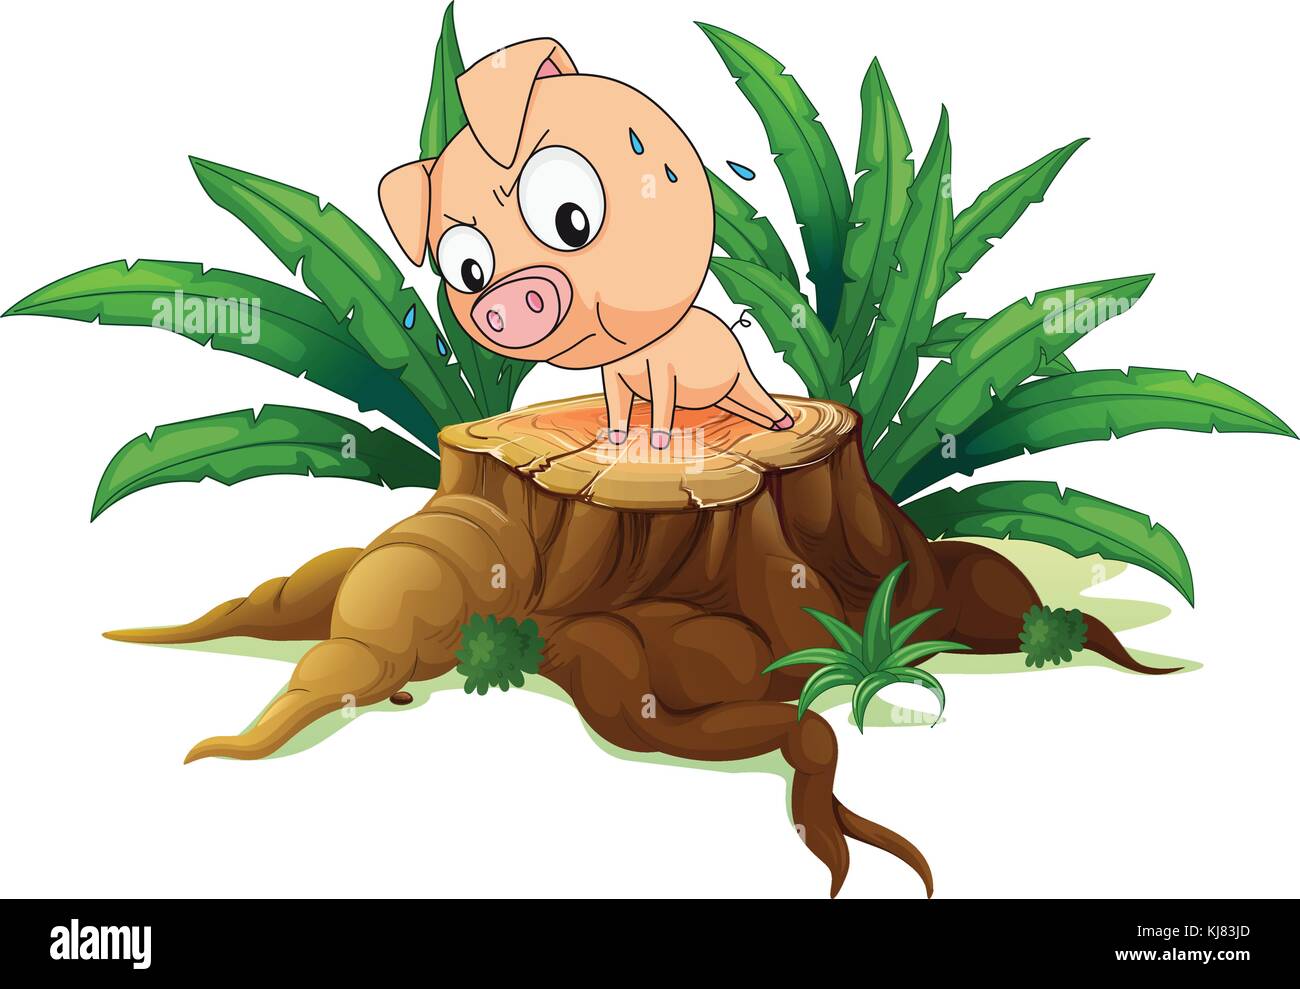 Illustration of a pig exercising above a tree on a white background Stock Vector